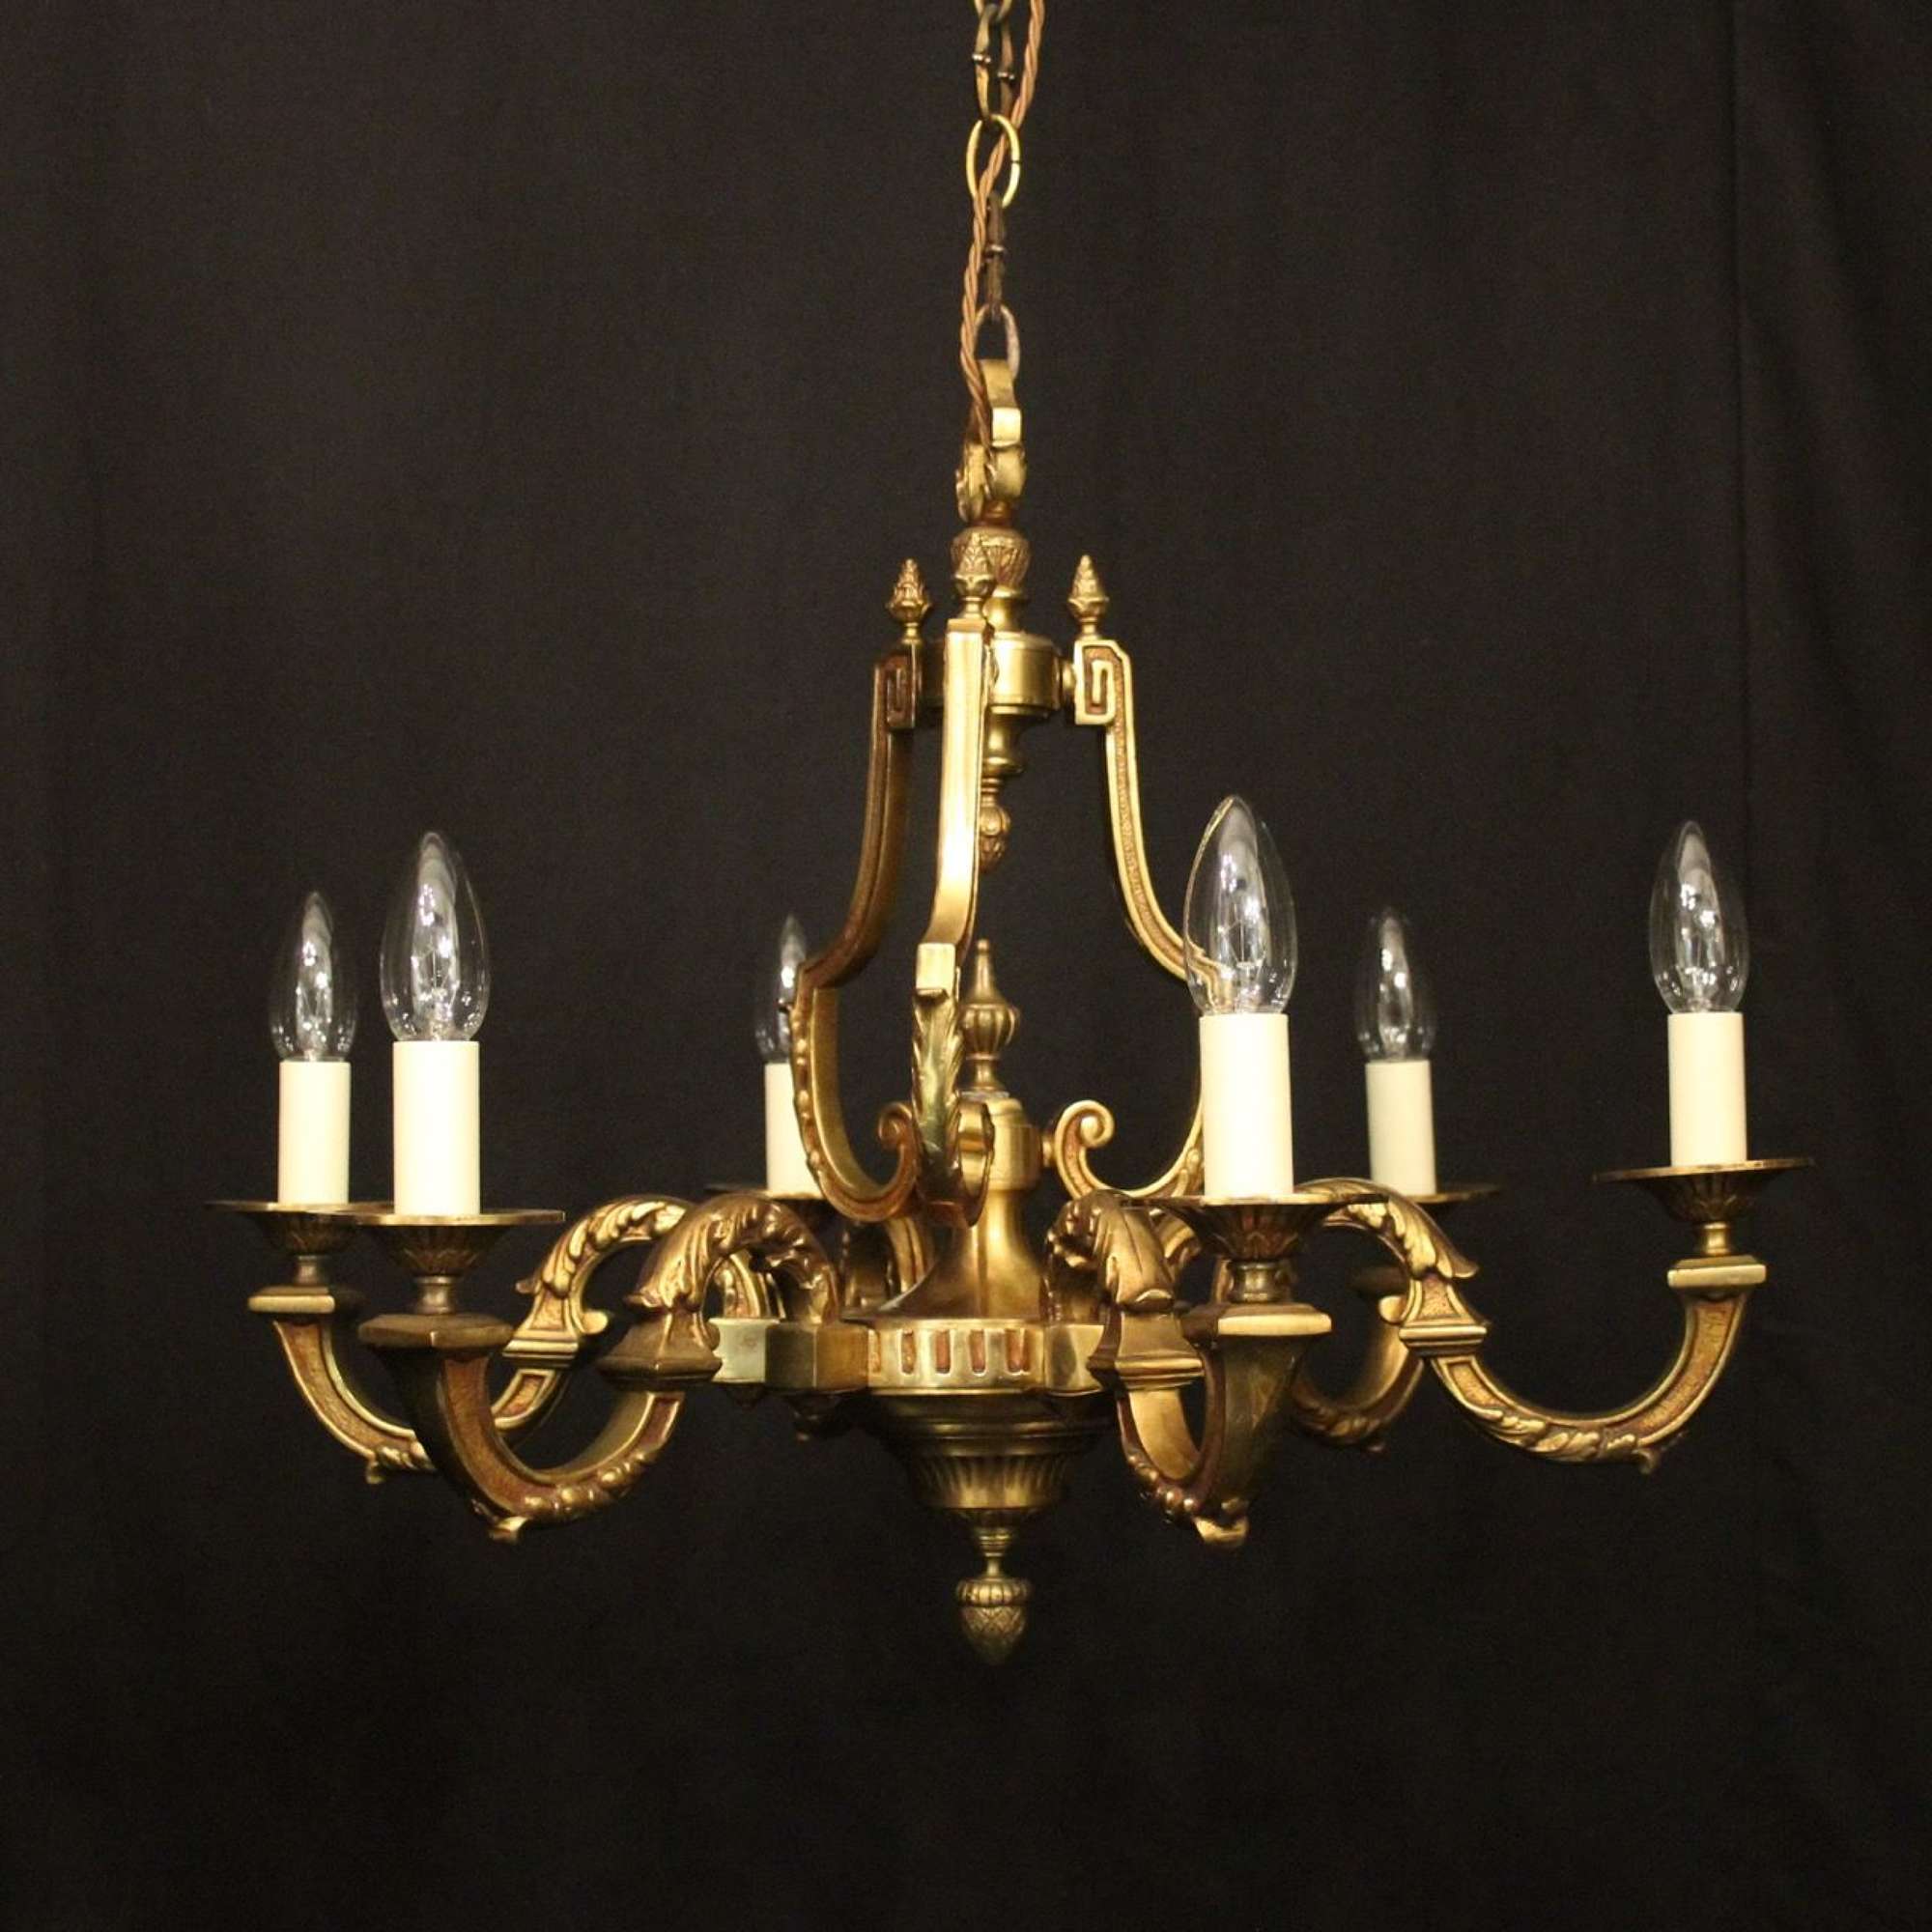 French Gilded 6 Light Antique Chandelier